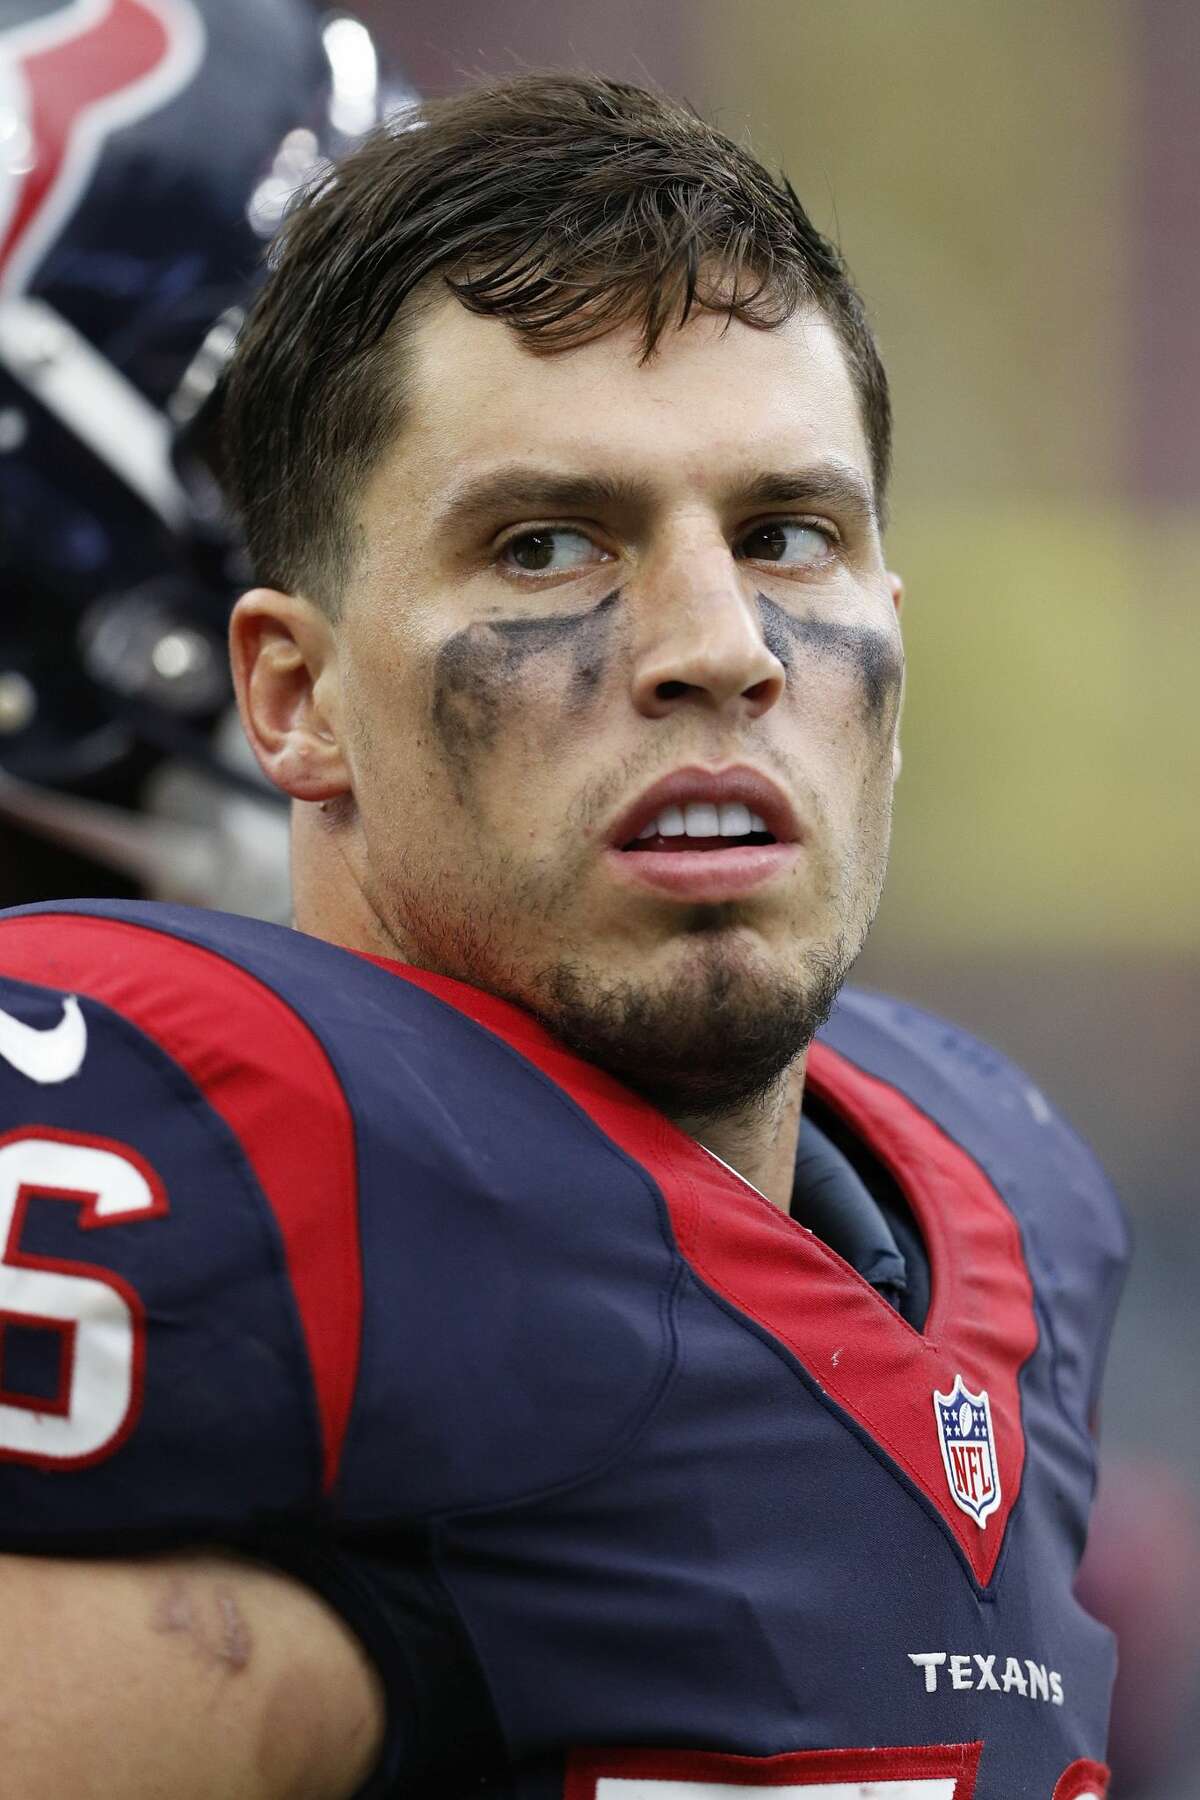 BRIAN CUSHING, LB, HOUSTON TEXANS Cushing was suspended 10 games for violating policy on performance enhancing substances.